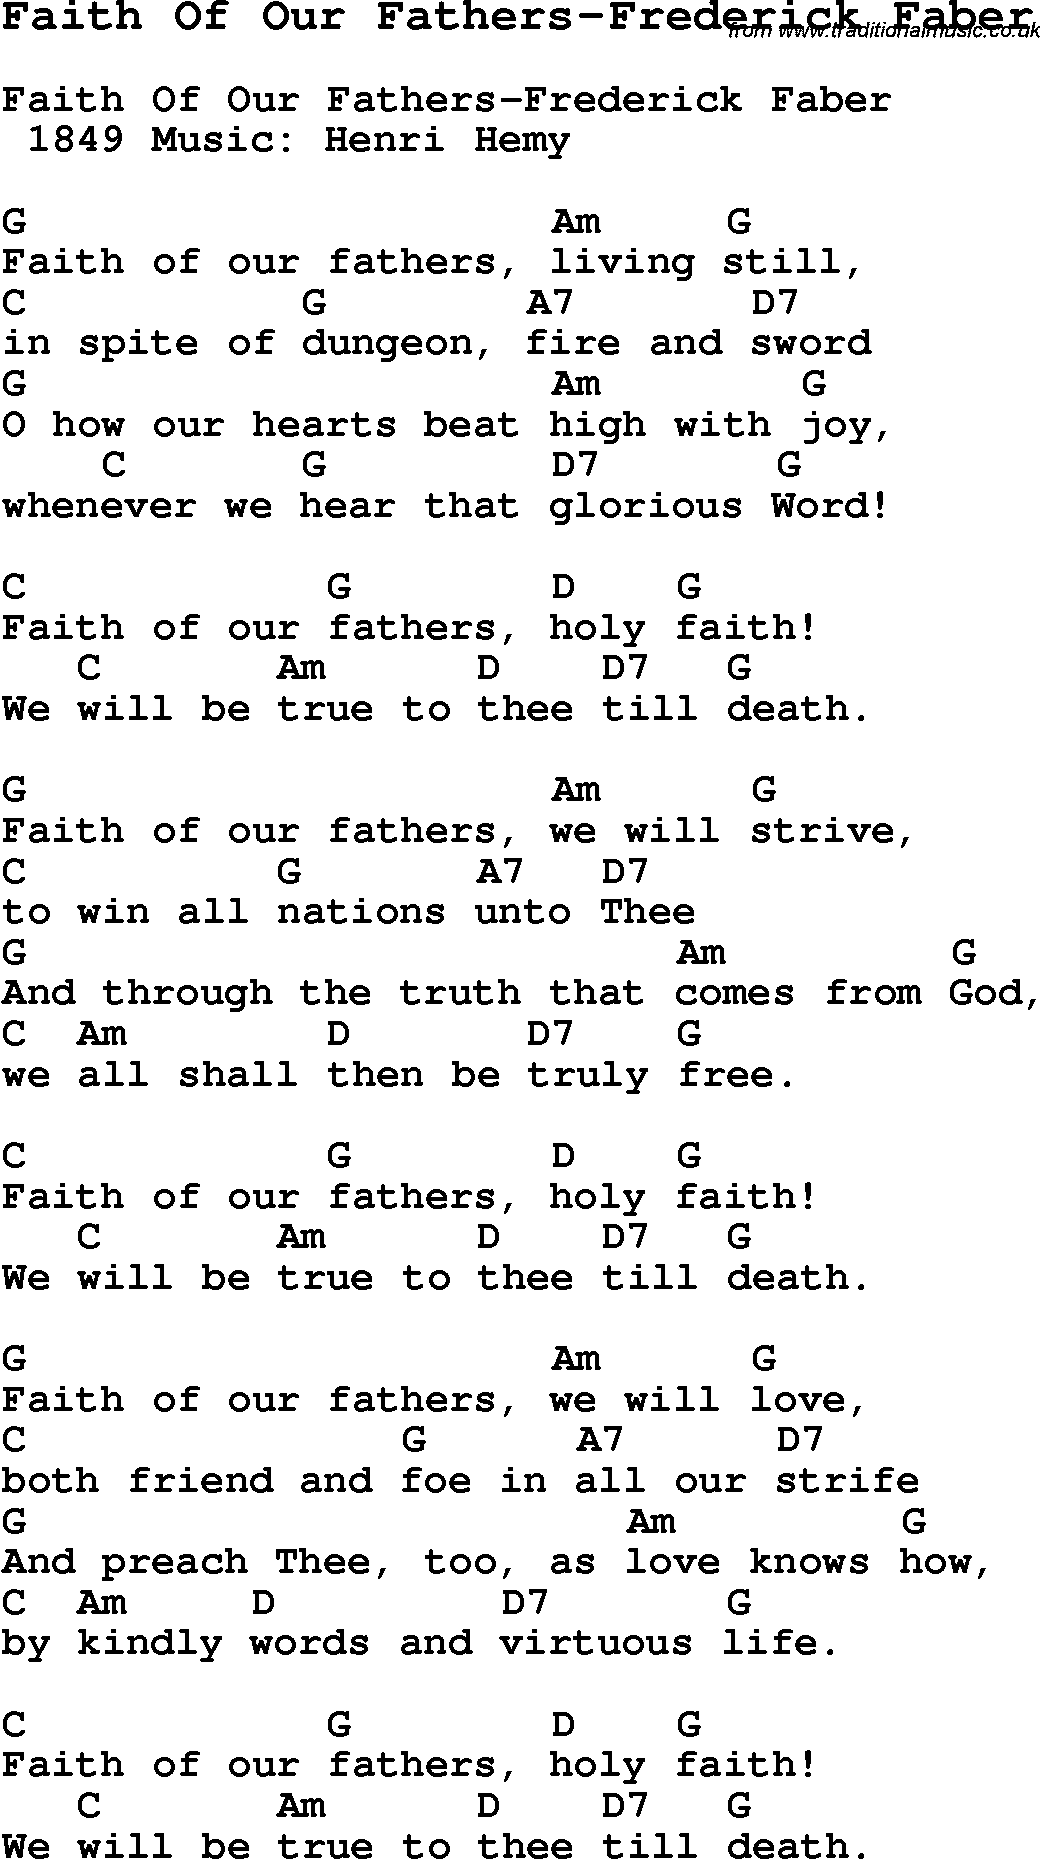 Summer-Camp Song, Faith Of Our Fathers-Frederick Faber, with lyrics and chords for Ukulele, Guitar Banjo etc.